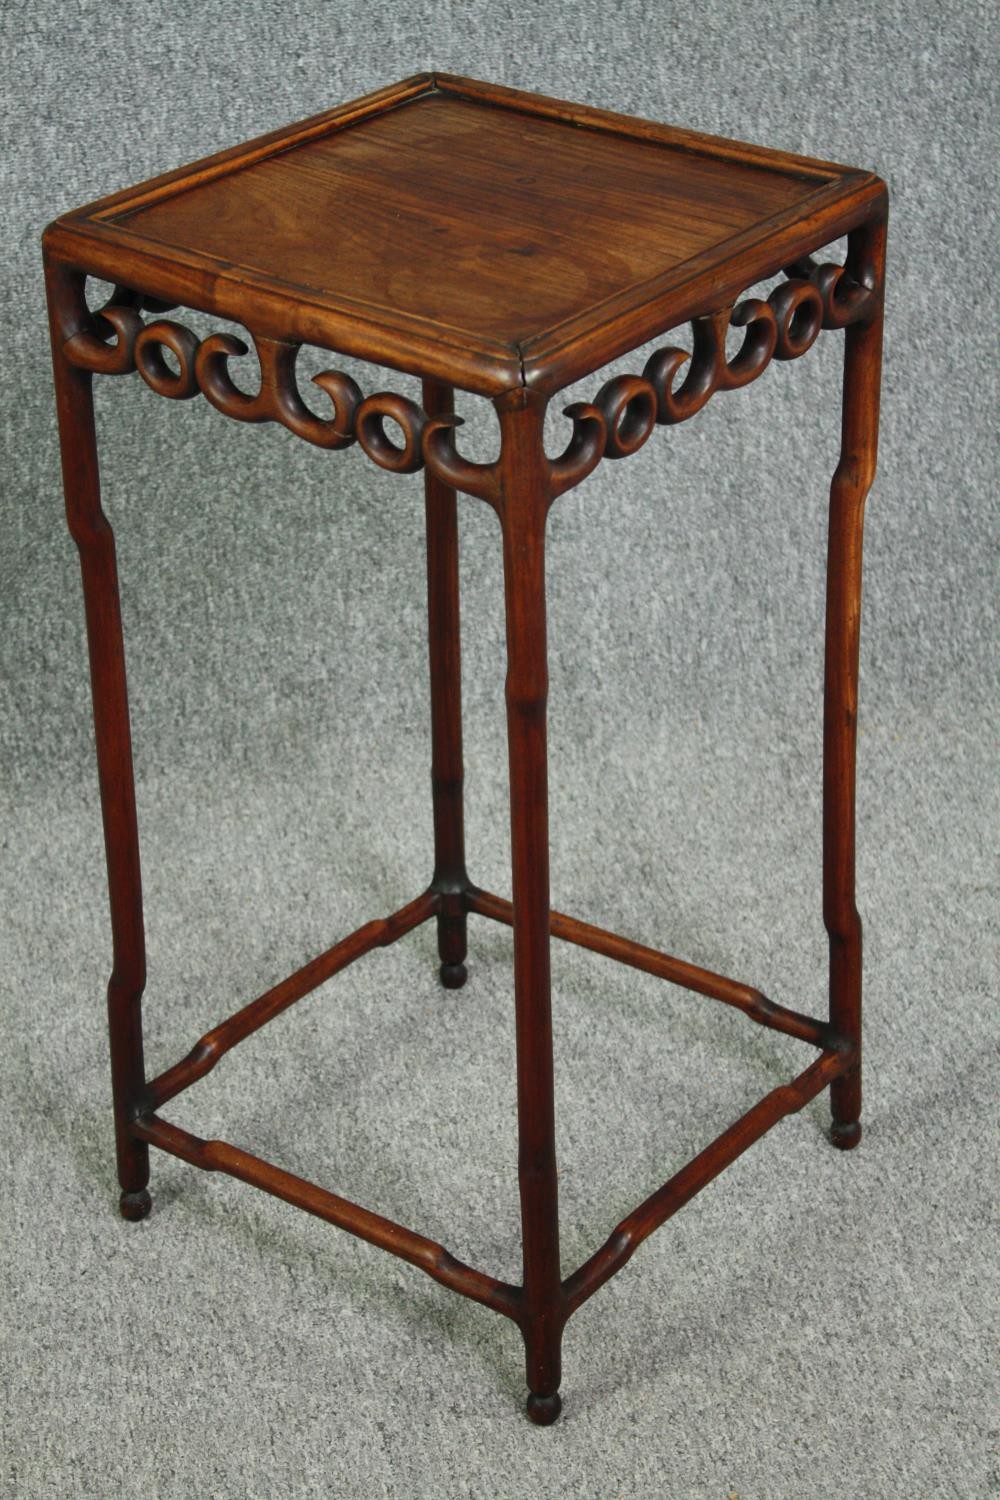 Urn or plant stand, Chinese hardwood. H.73 W.36 D.36cm. - Image 2 of 4